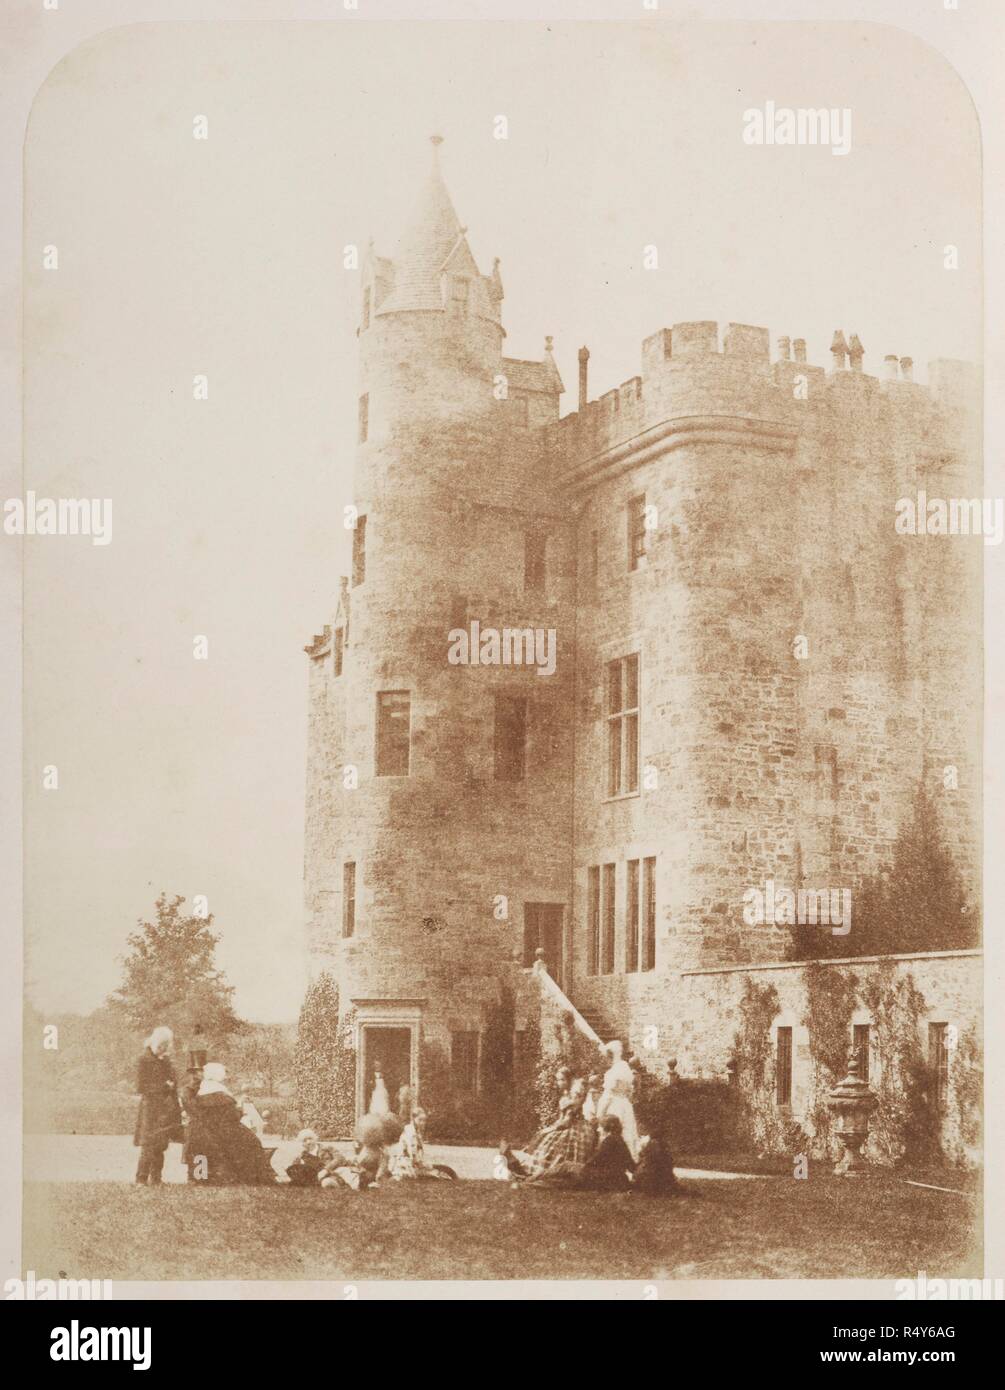 Bonaly. Group of Lord Cockburn's family posed on the lawn of Bonaly Towers. Presumably taken on the same occasion as print 69, this view is primarily an architectural rather than a portrait study, the emphasis directed towards the castle rather than to the group in the foreground. The group includes John Henning, Mrs Cockburn, Lord Cockburn, Mrs Cleghorn and David Octavius Hill. One Hundred Calotype Sketches by D. O. Hill, R.S.A. and R. Adamson. Edinburgh. From a volume of calotype images and portraits. Early photographic technique also called Talbotype. Dating from 1849. David Octavius Hill a Stock Photo